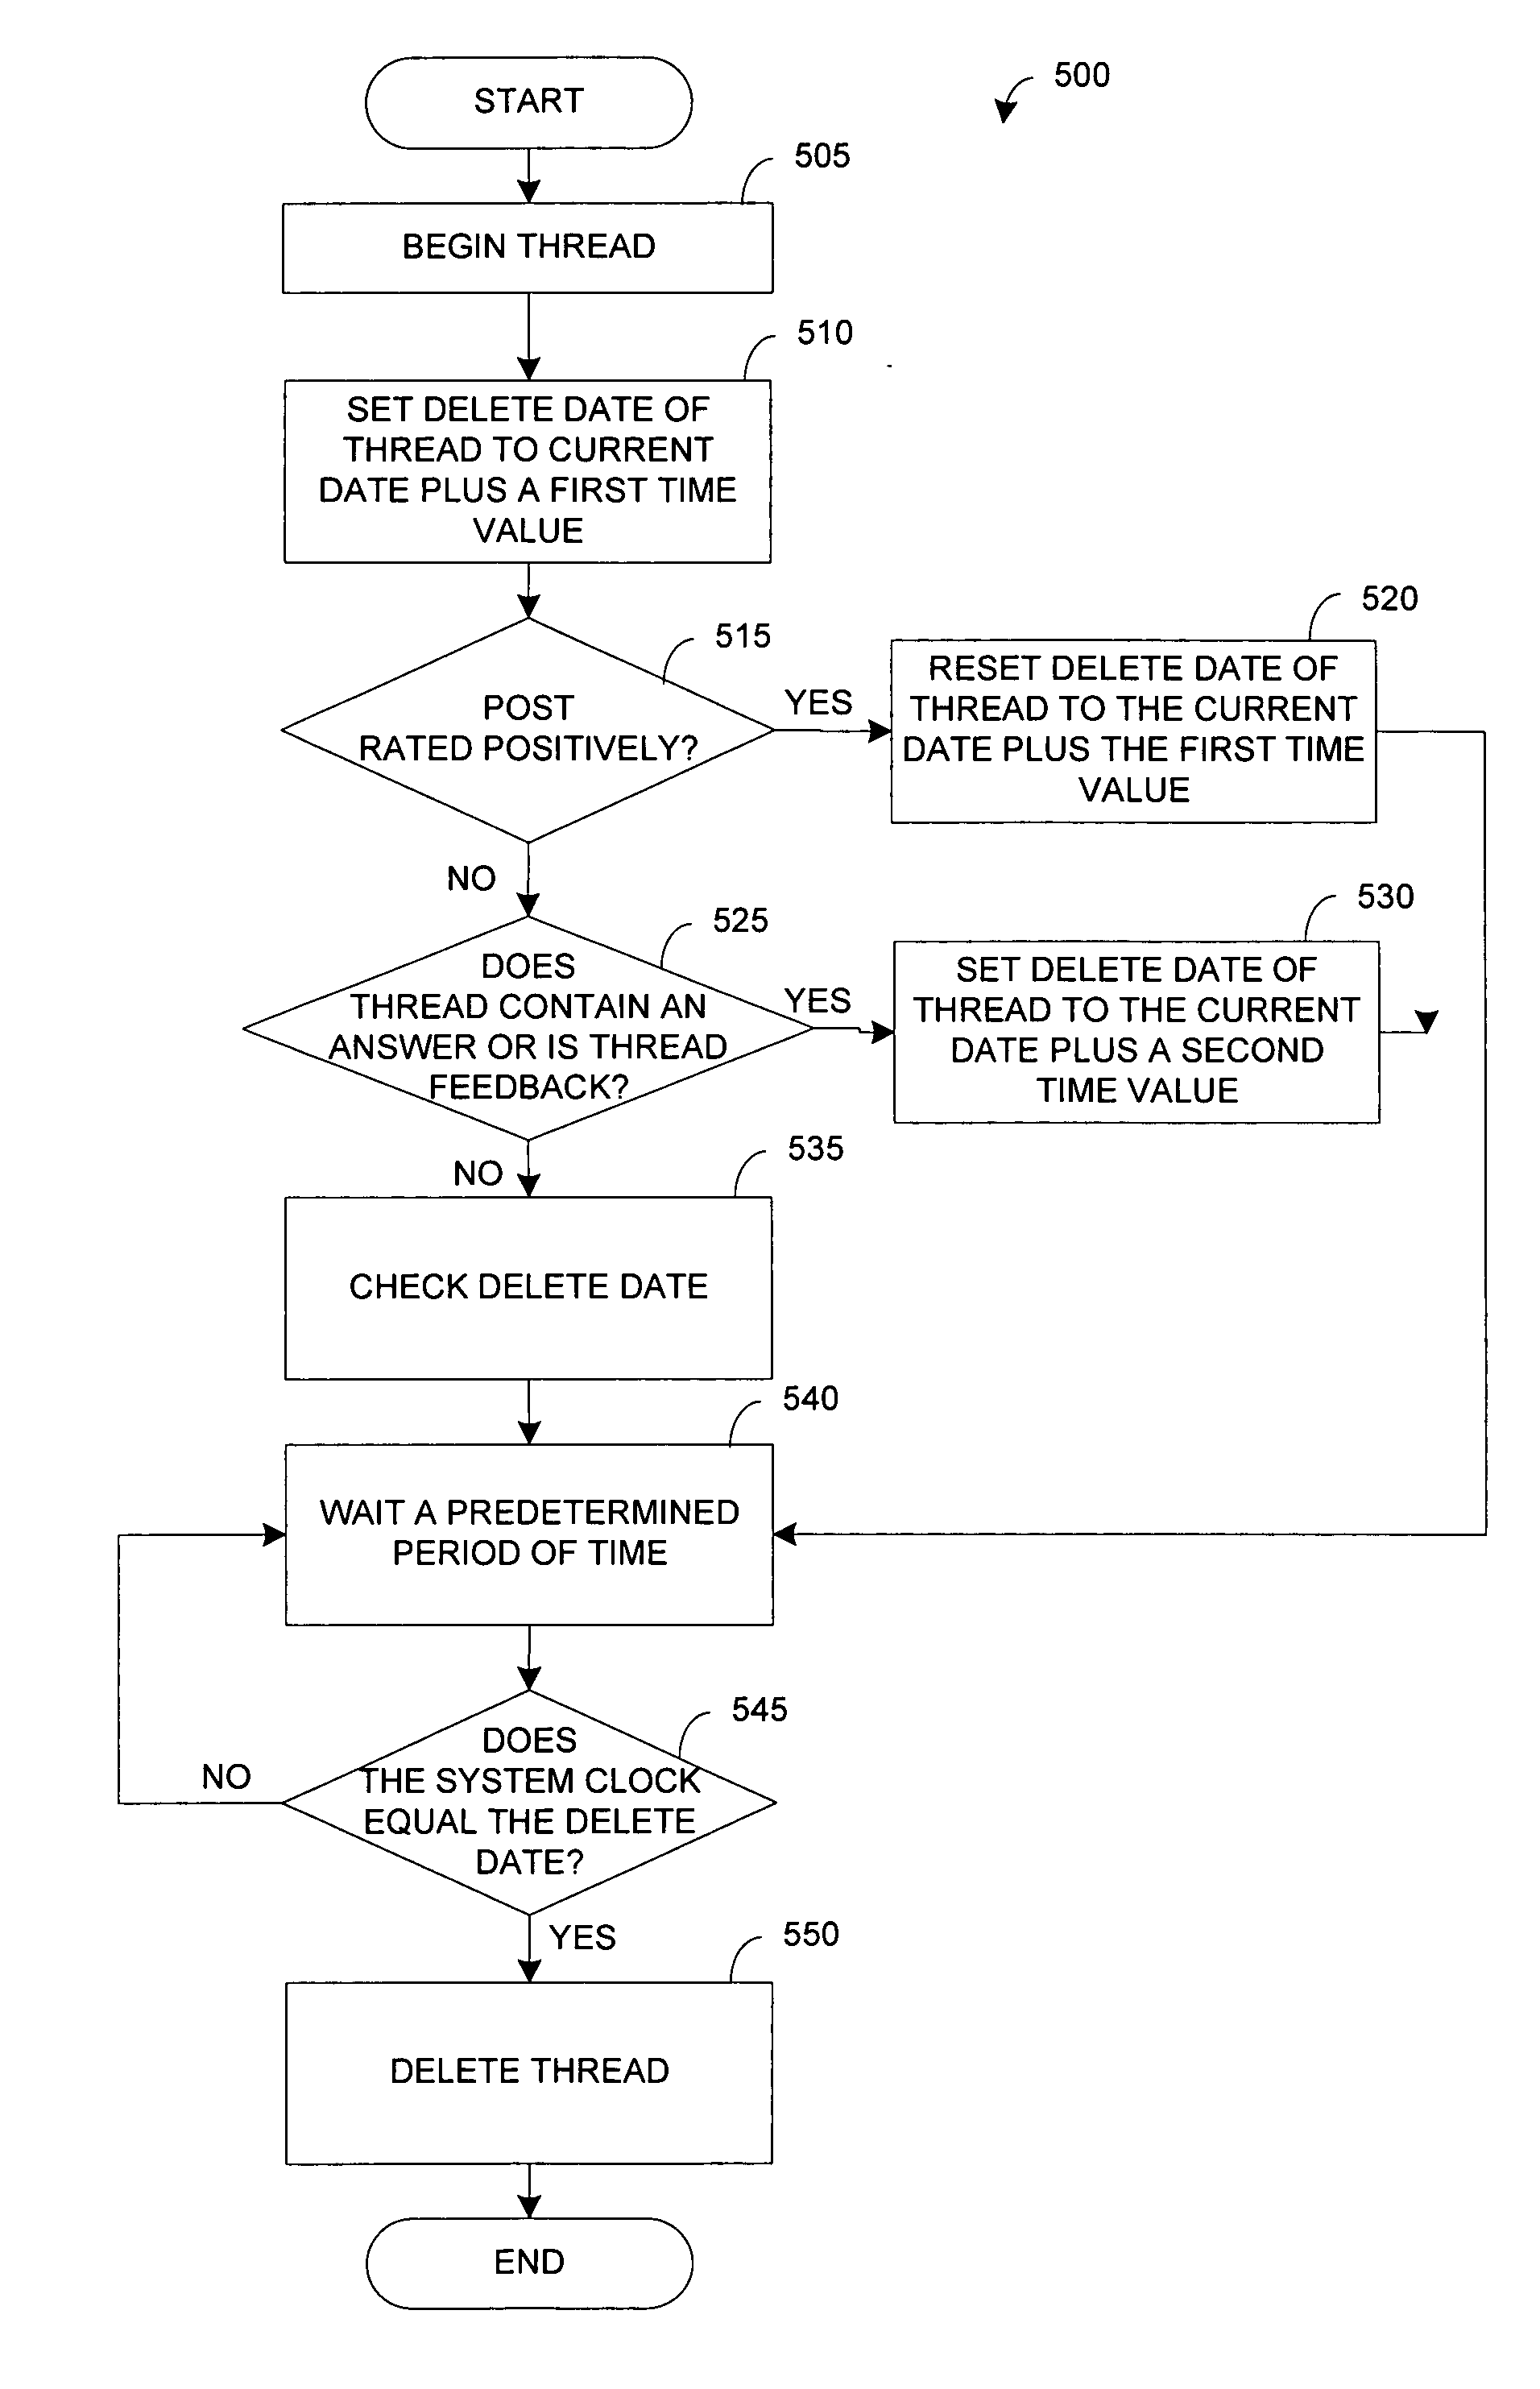 Systems and methods for managing discussion threads based on ratings